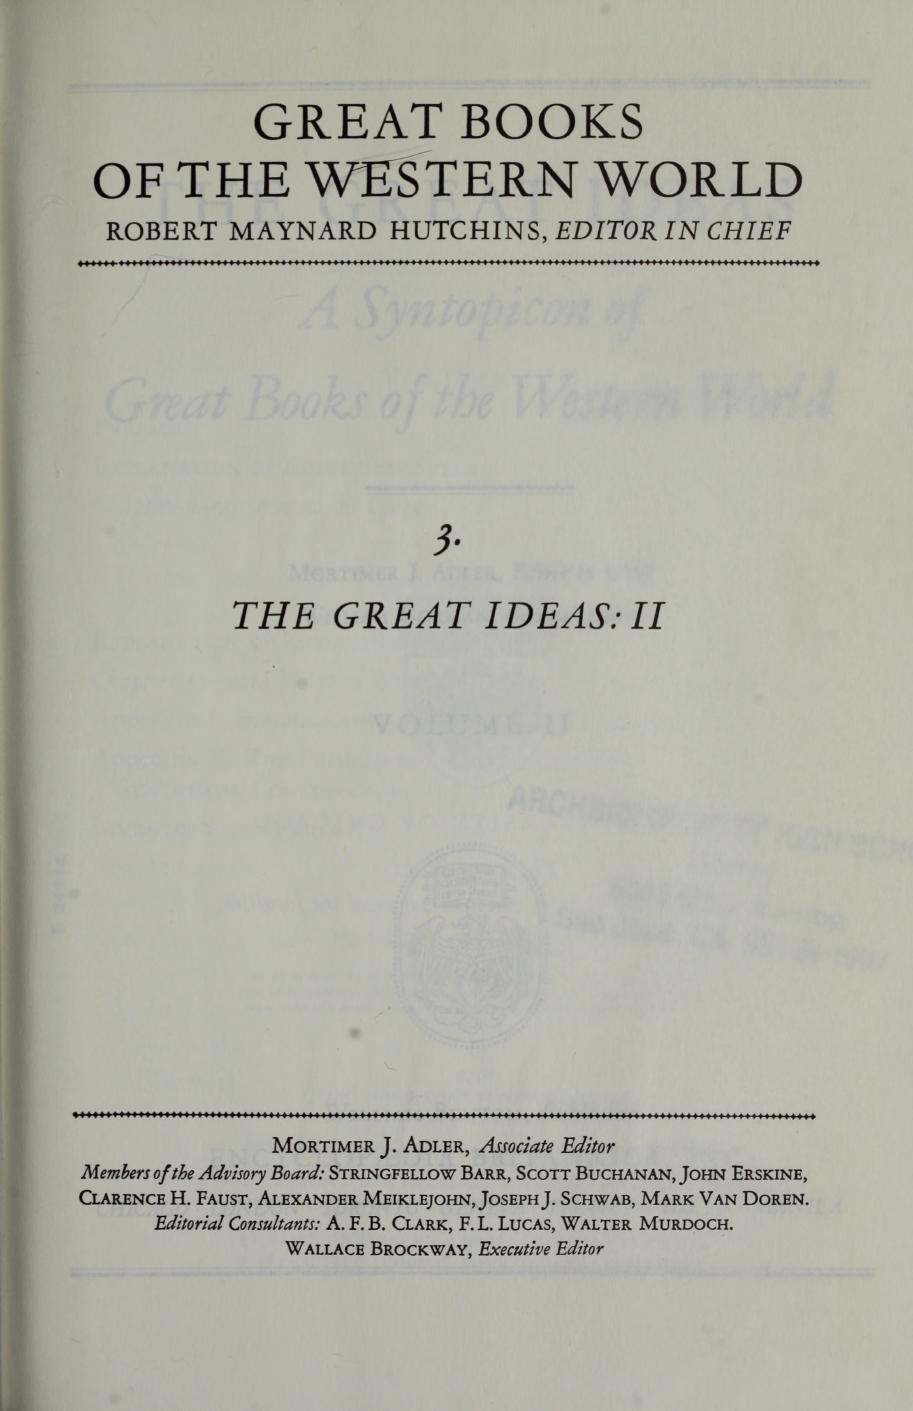 Great Books of the Western World - Volume 3